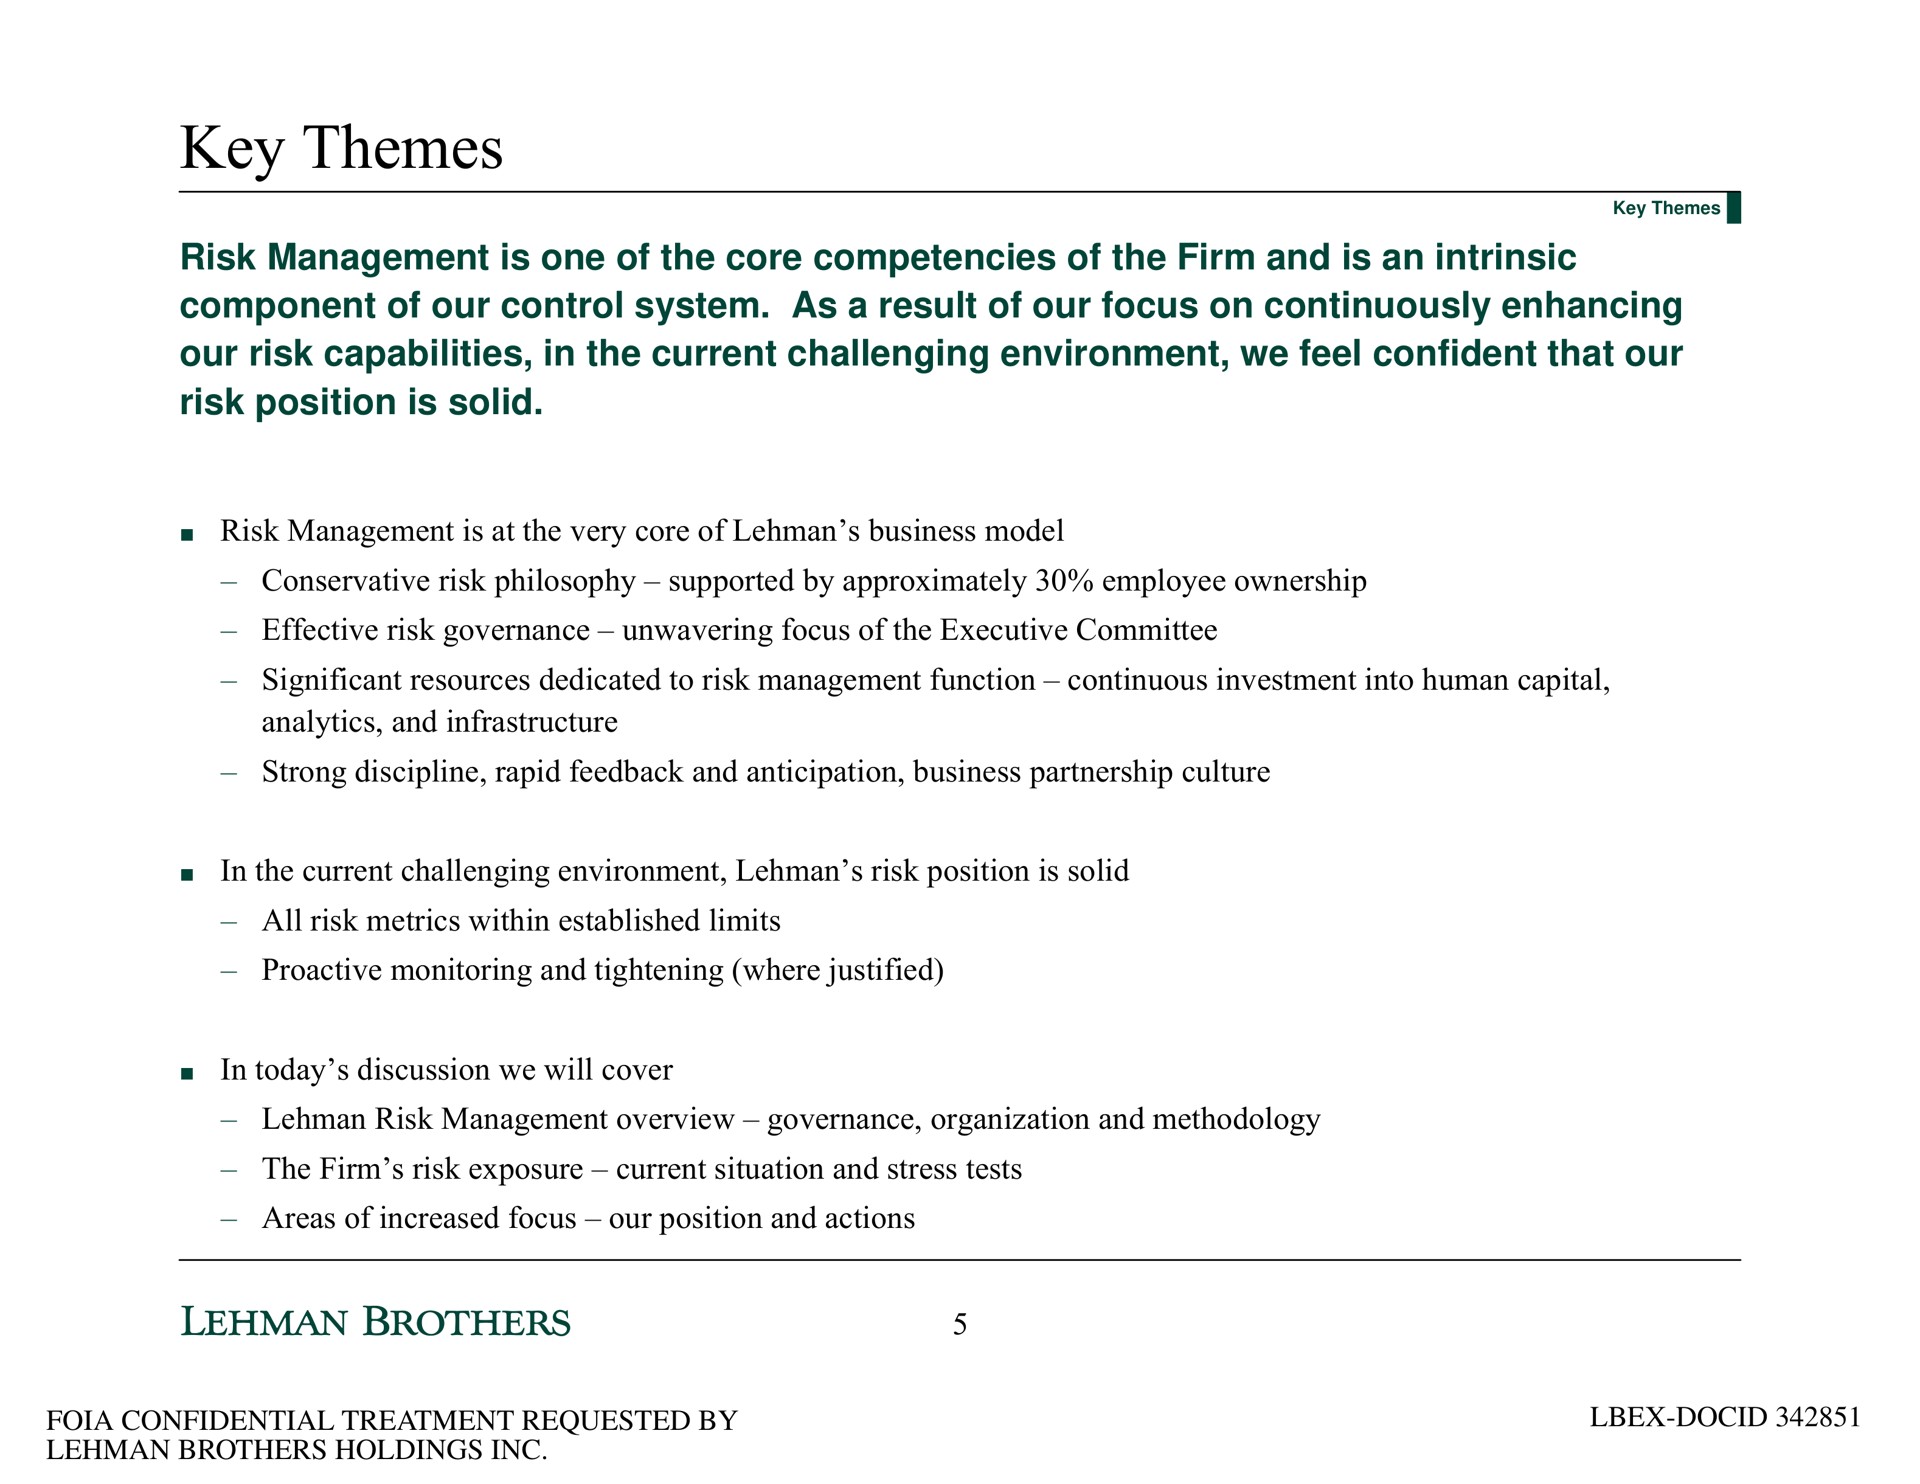 key themes risk management is one of the core competencies of the firm and is an intrinsic component of our control system as a result of our focus on continuously enhancing our risk capabilities in the current challenging environment we feel confident that our risk position is solid | Lehman Brothers